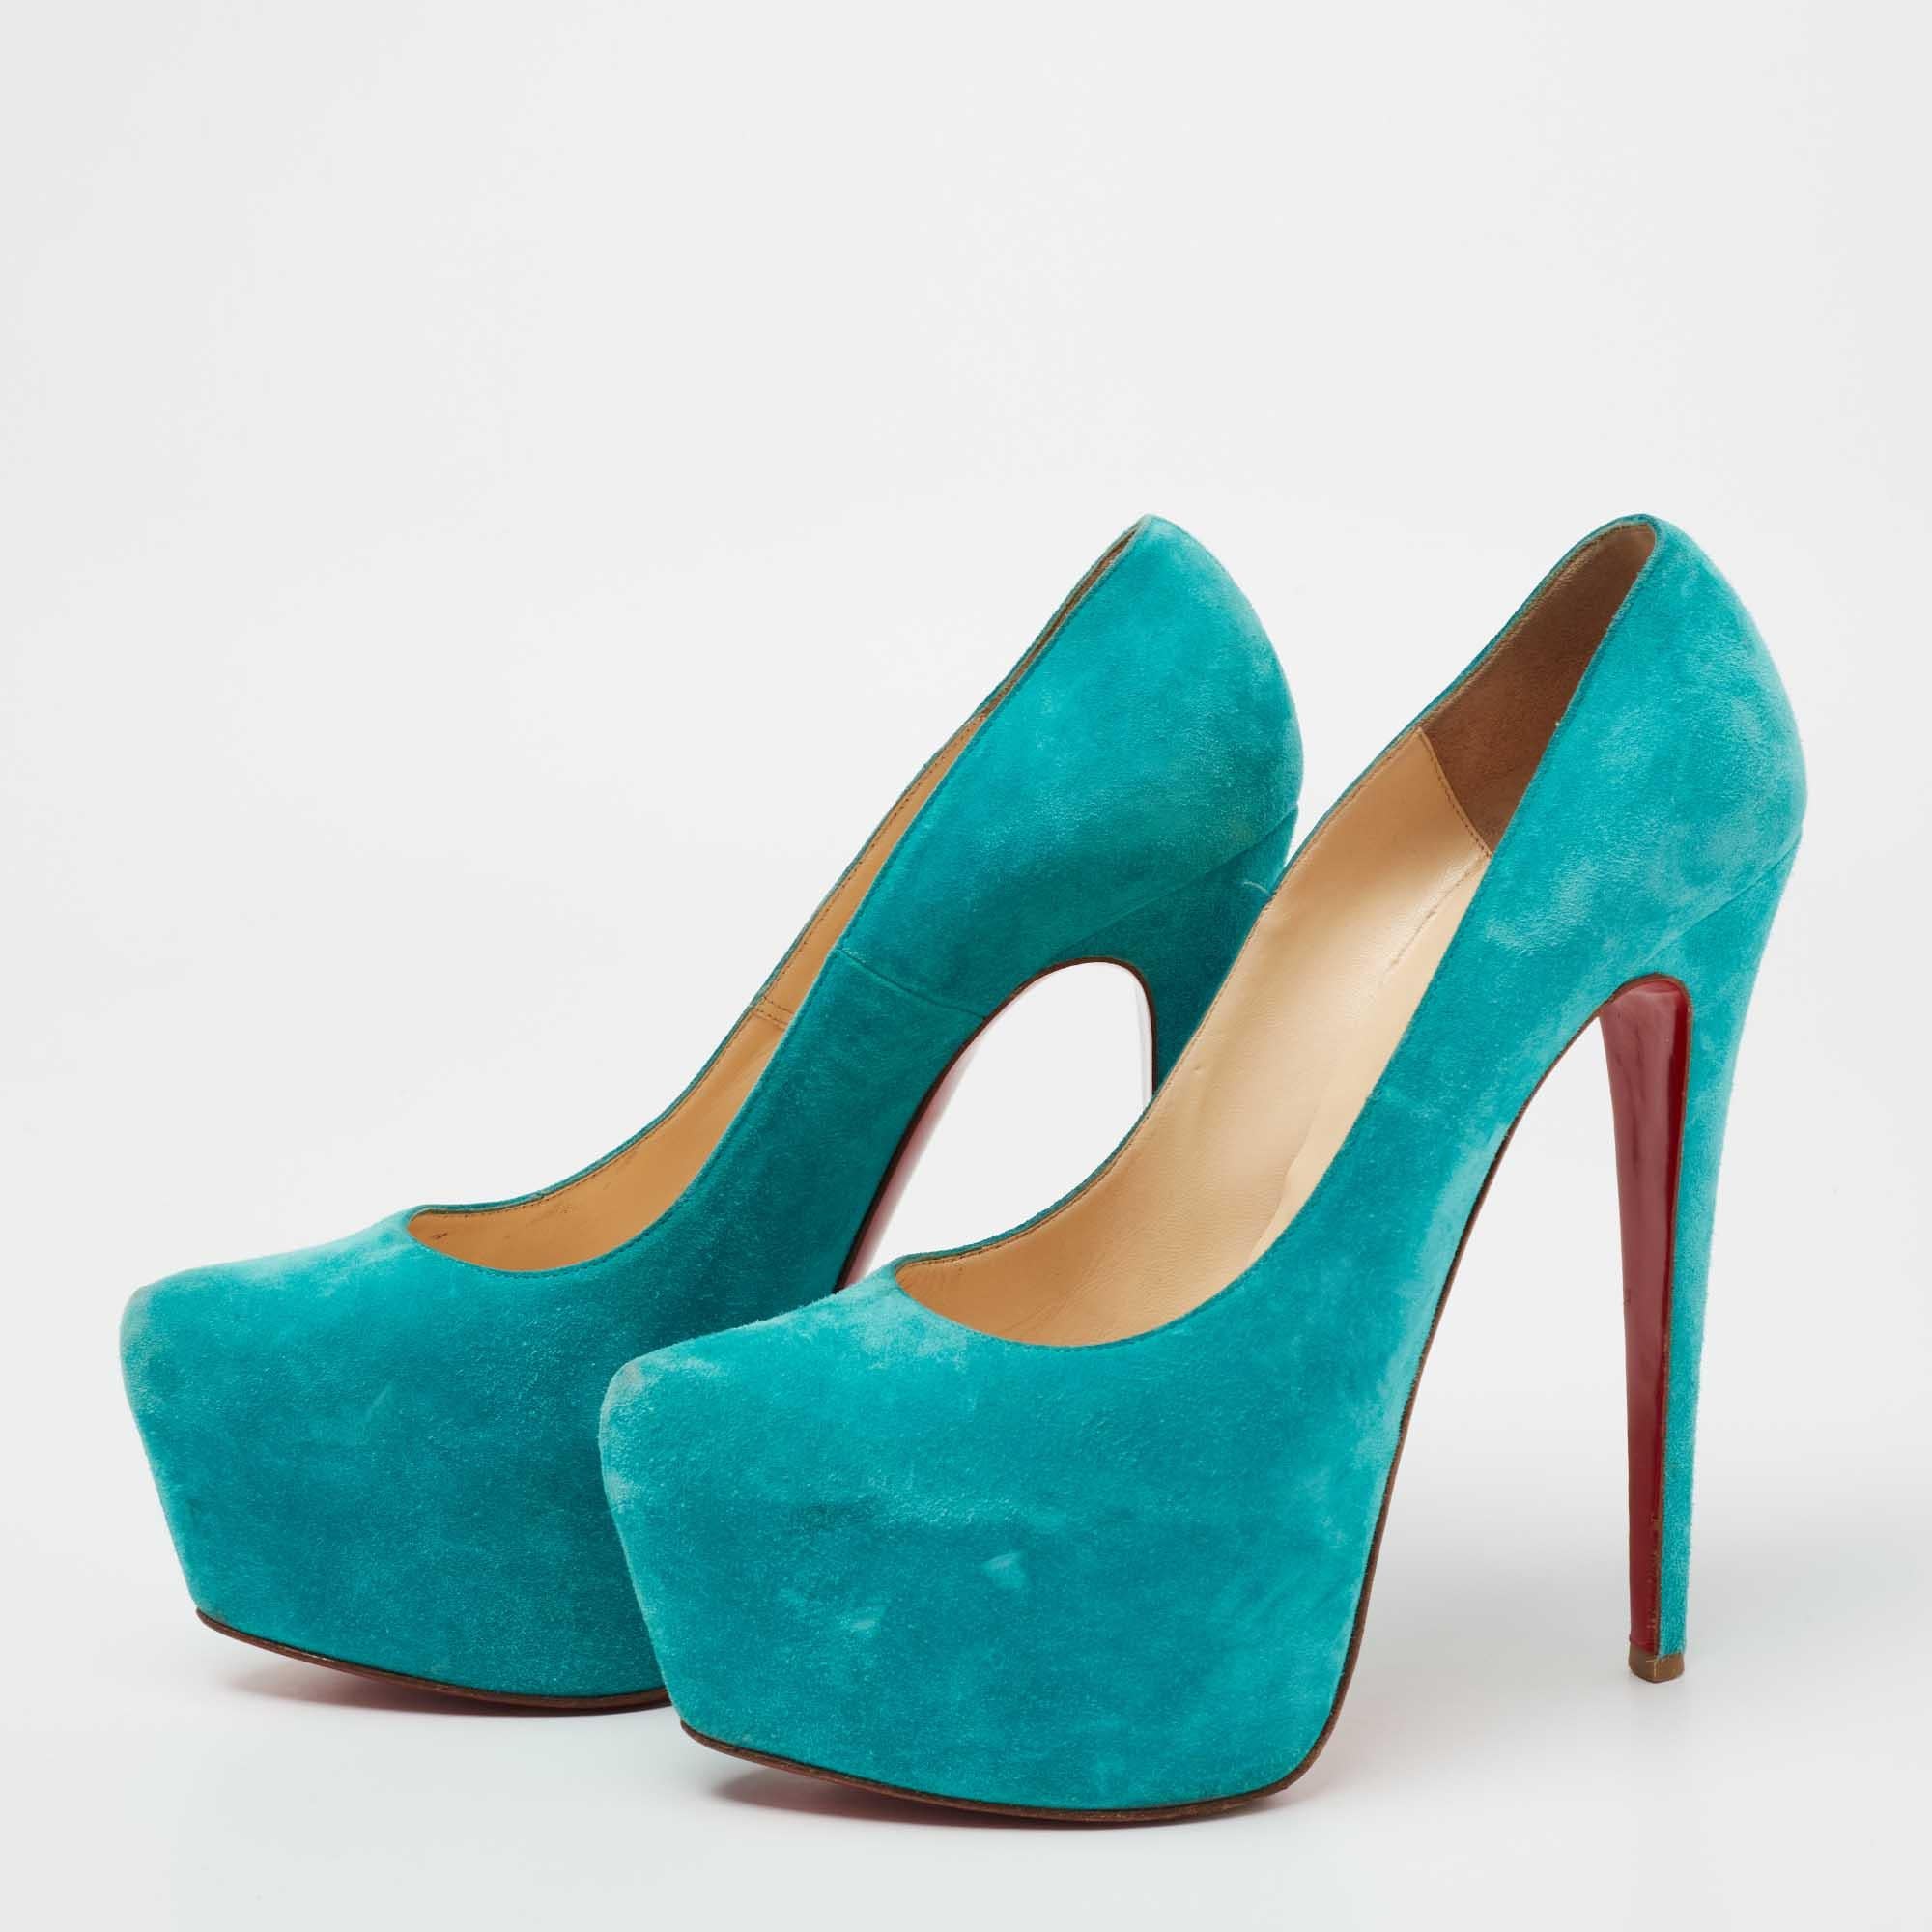 Take your love for Louboutins to new heights by adding this gorgeous pair to your collection. The turquoise blue pumps simply speak high fashion in every stitch and curve. The exteriors come made from suede, and the pumps are finished with